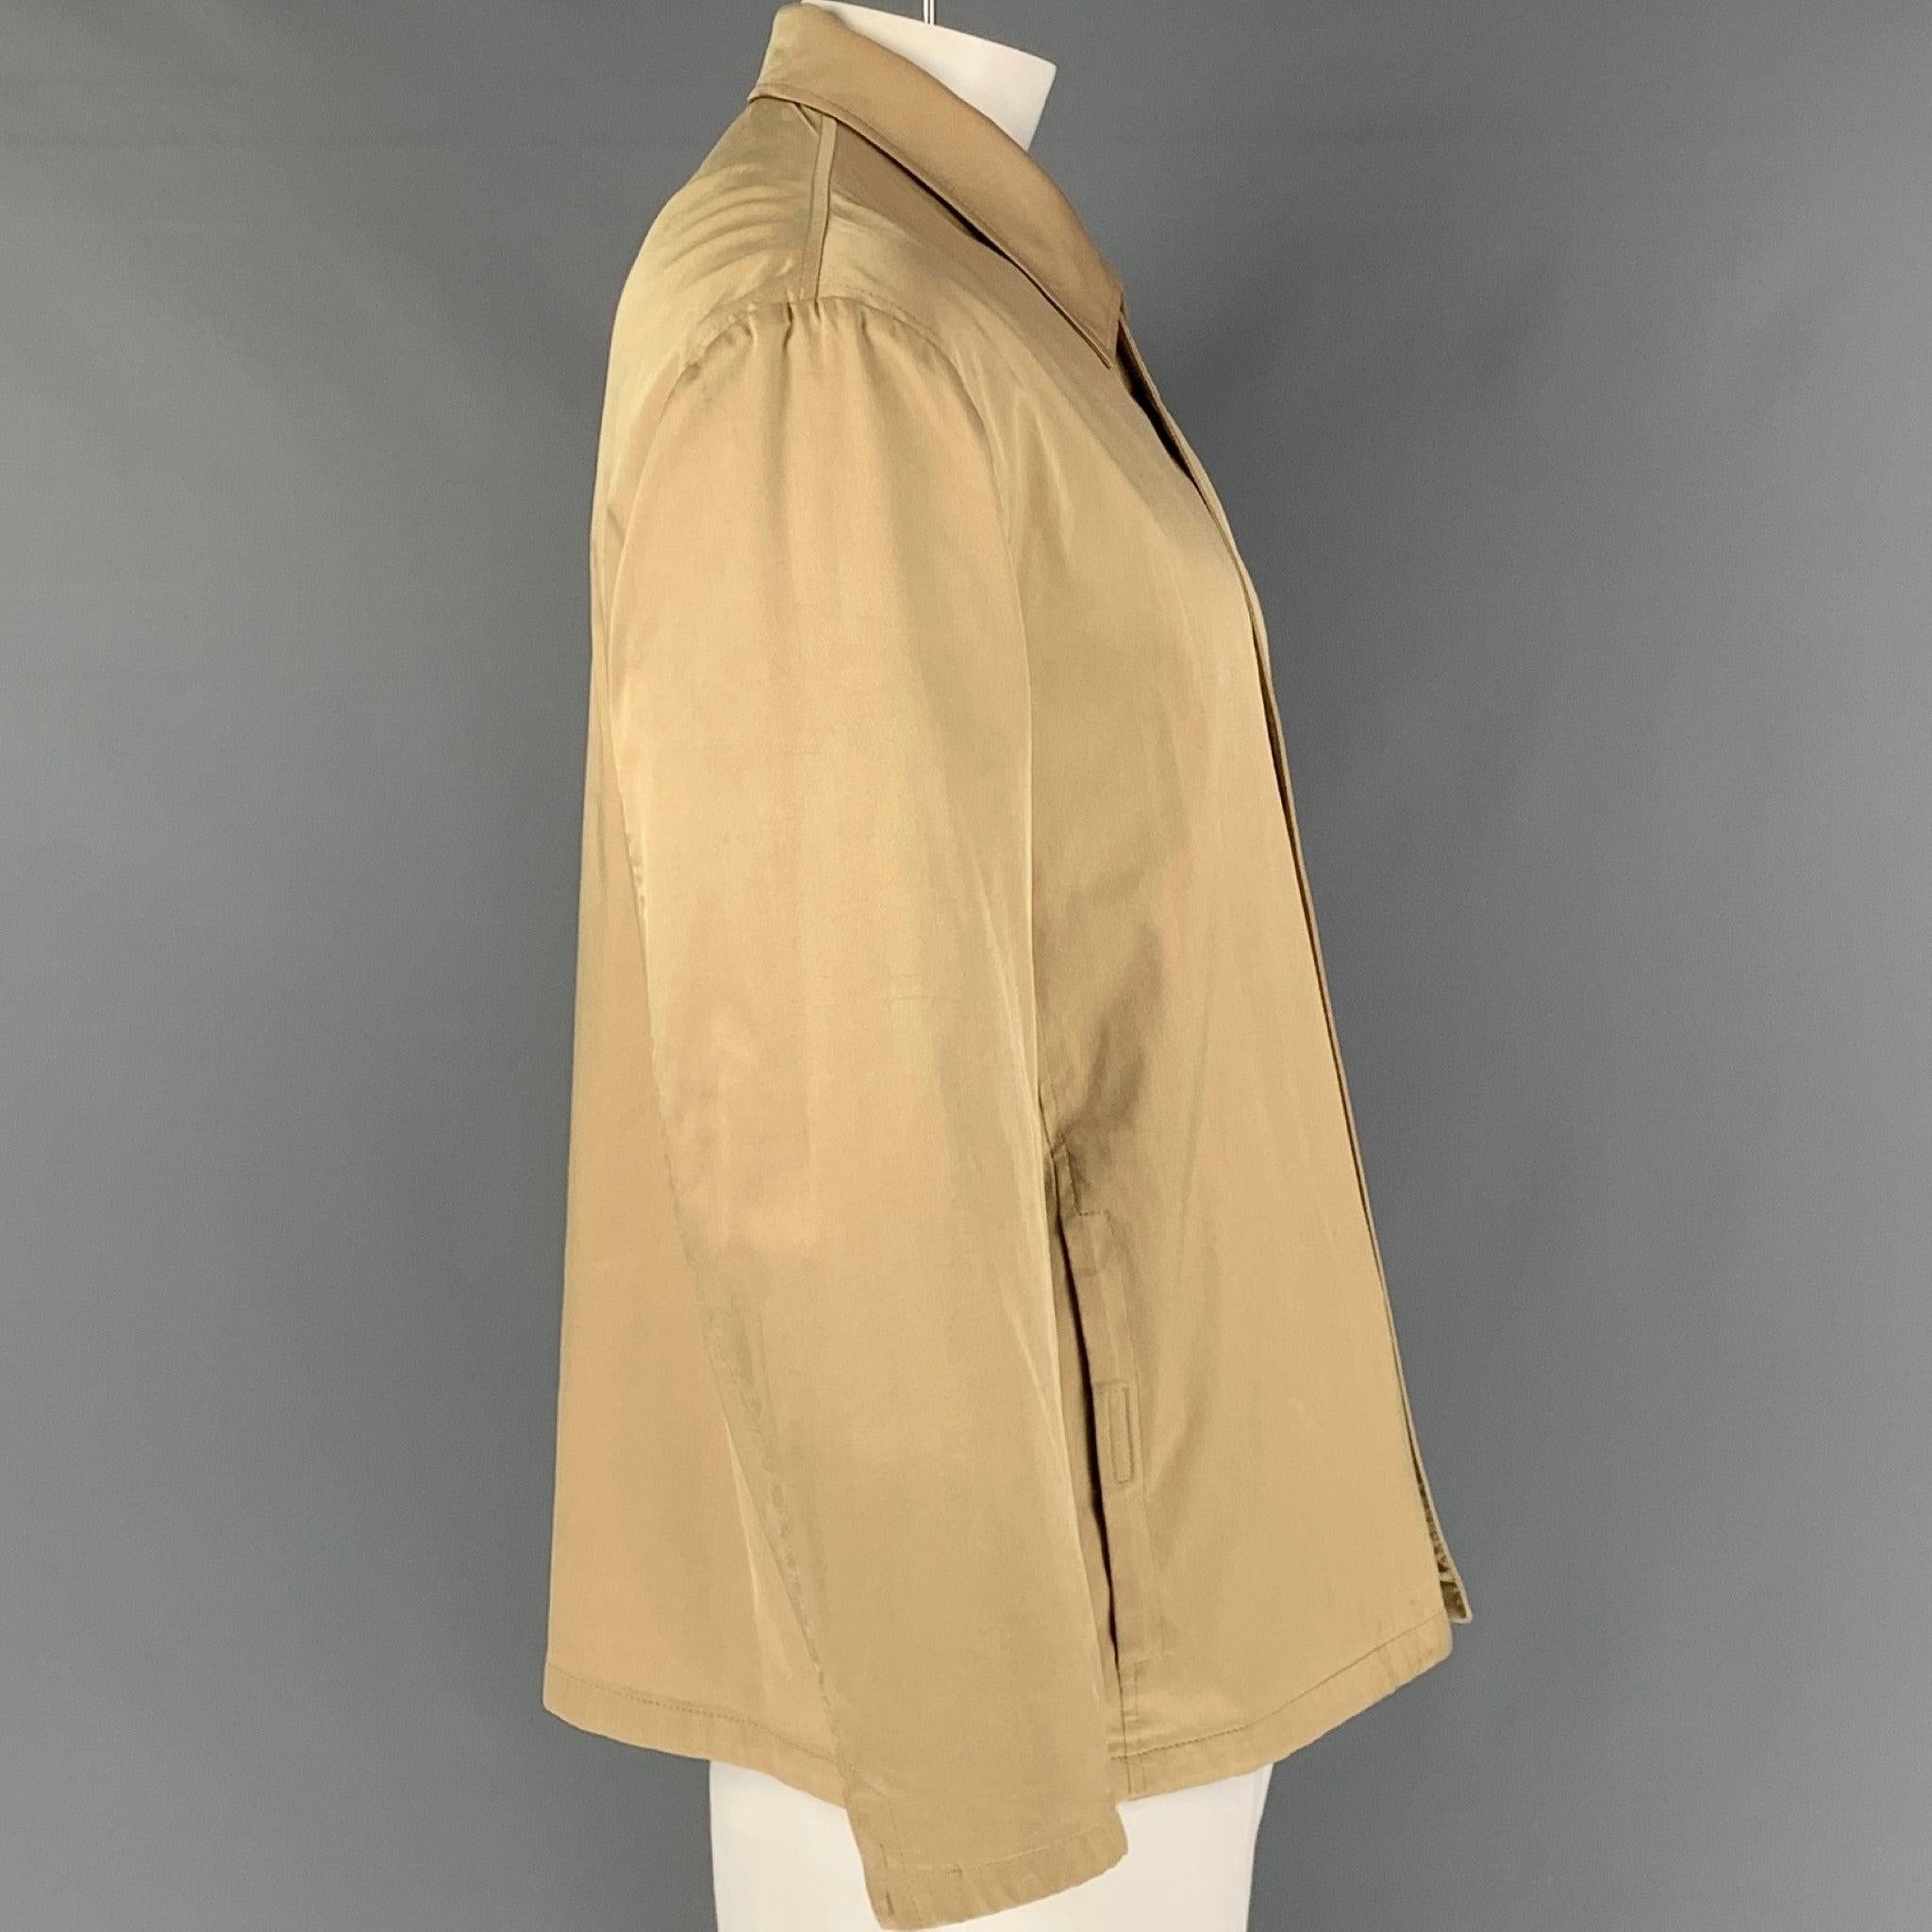 PRADA coat comes in a beige silk blend fabric featuring slit frontal pockets and zip up closure. Made in Italy.Very Good Pre-Owned Condition. Minor marks at collar and sleeves. 
 

 Marked:  XL 
 

 Measurements: 
  
 Shoulder: 21 inches Chest: 52